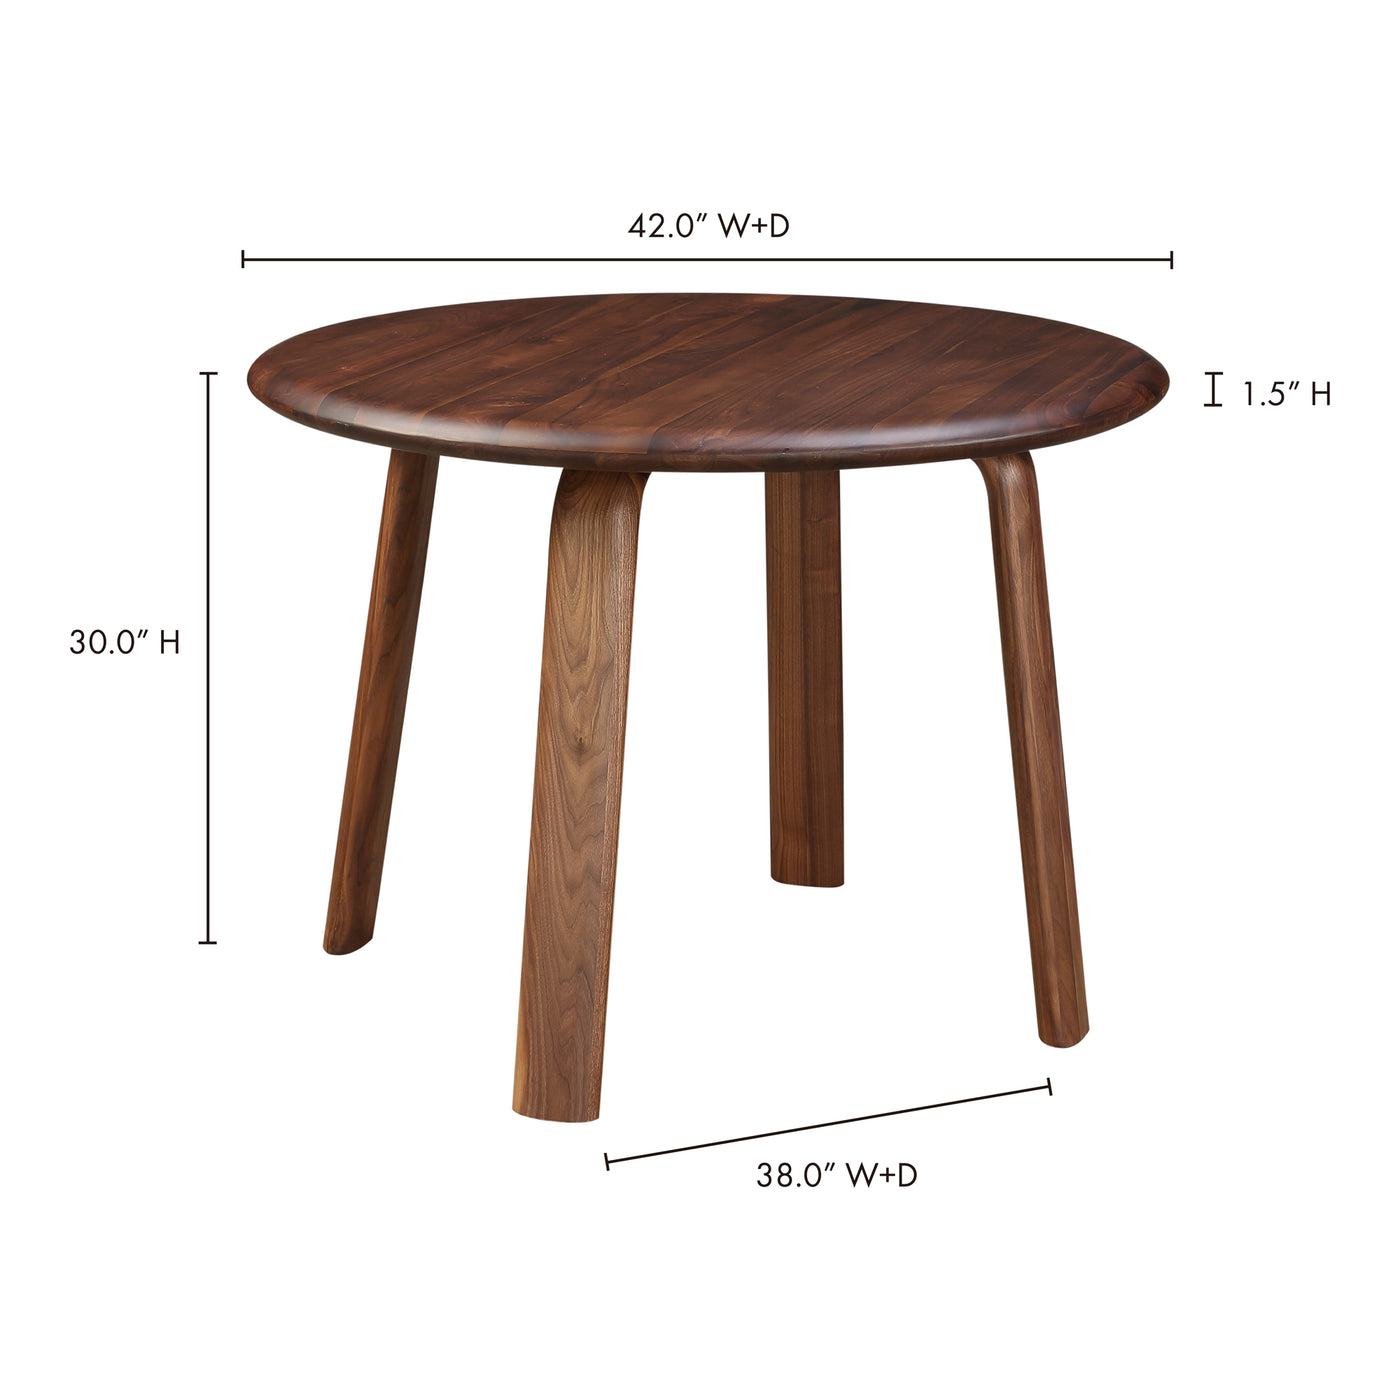 The sky is always blue with the Malibu Round Dining Table. Made from smooth walnut wood with a matt lacquer finish, this d...